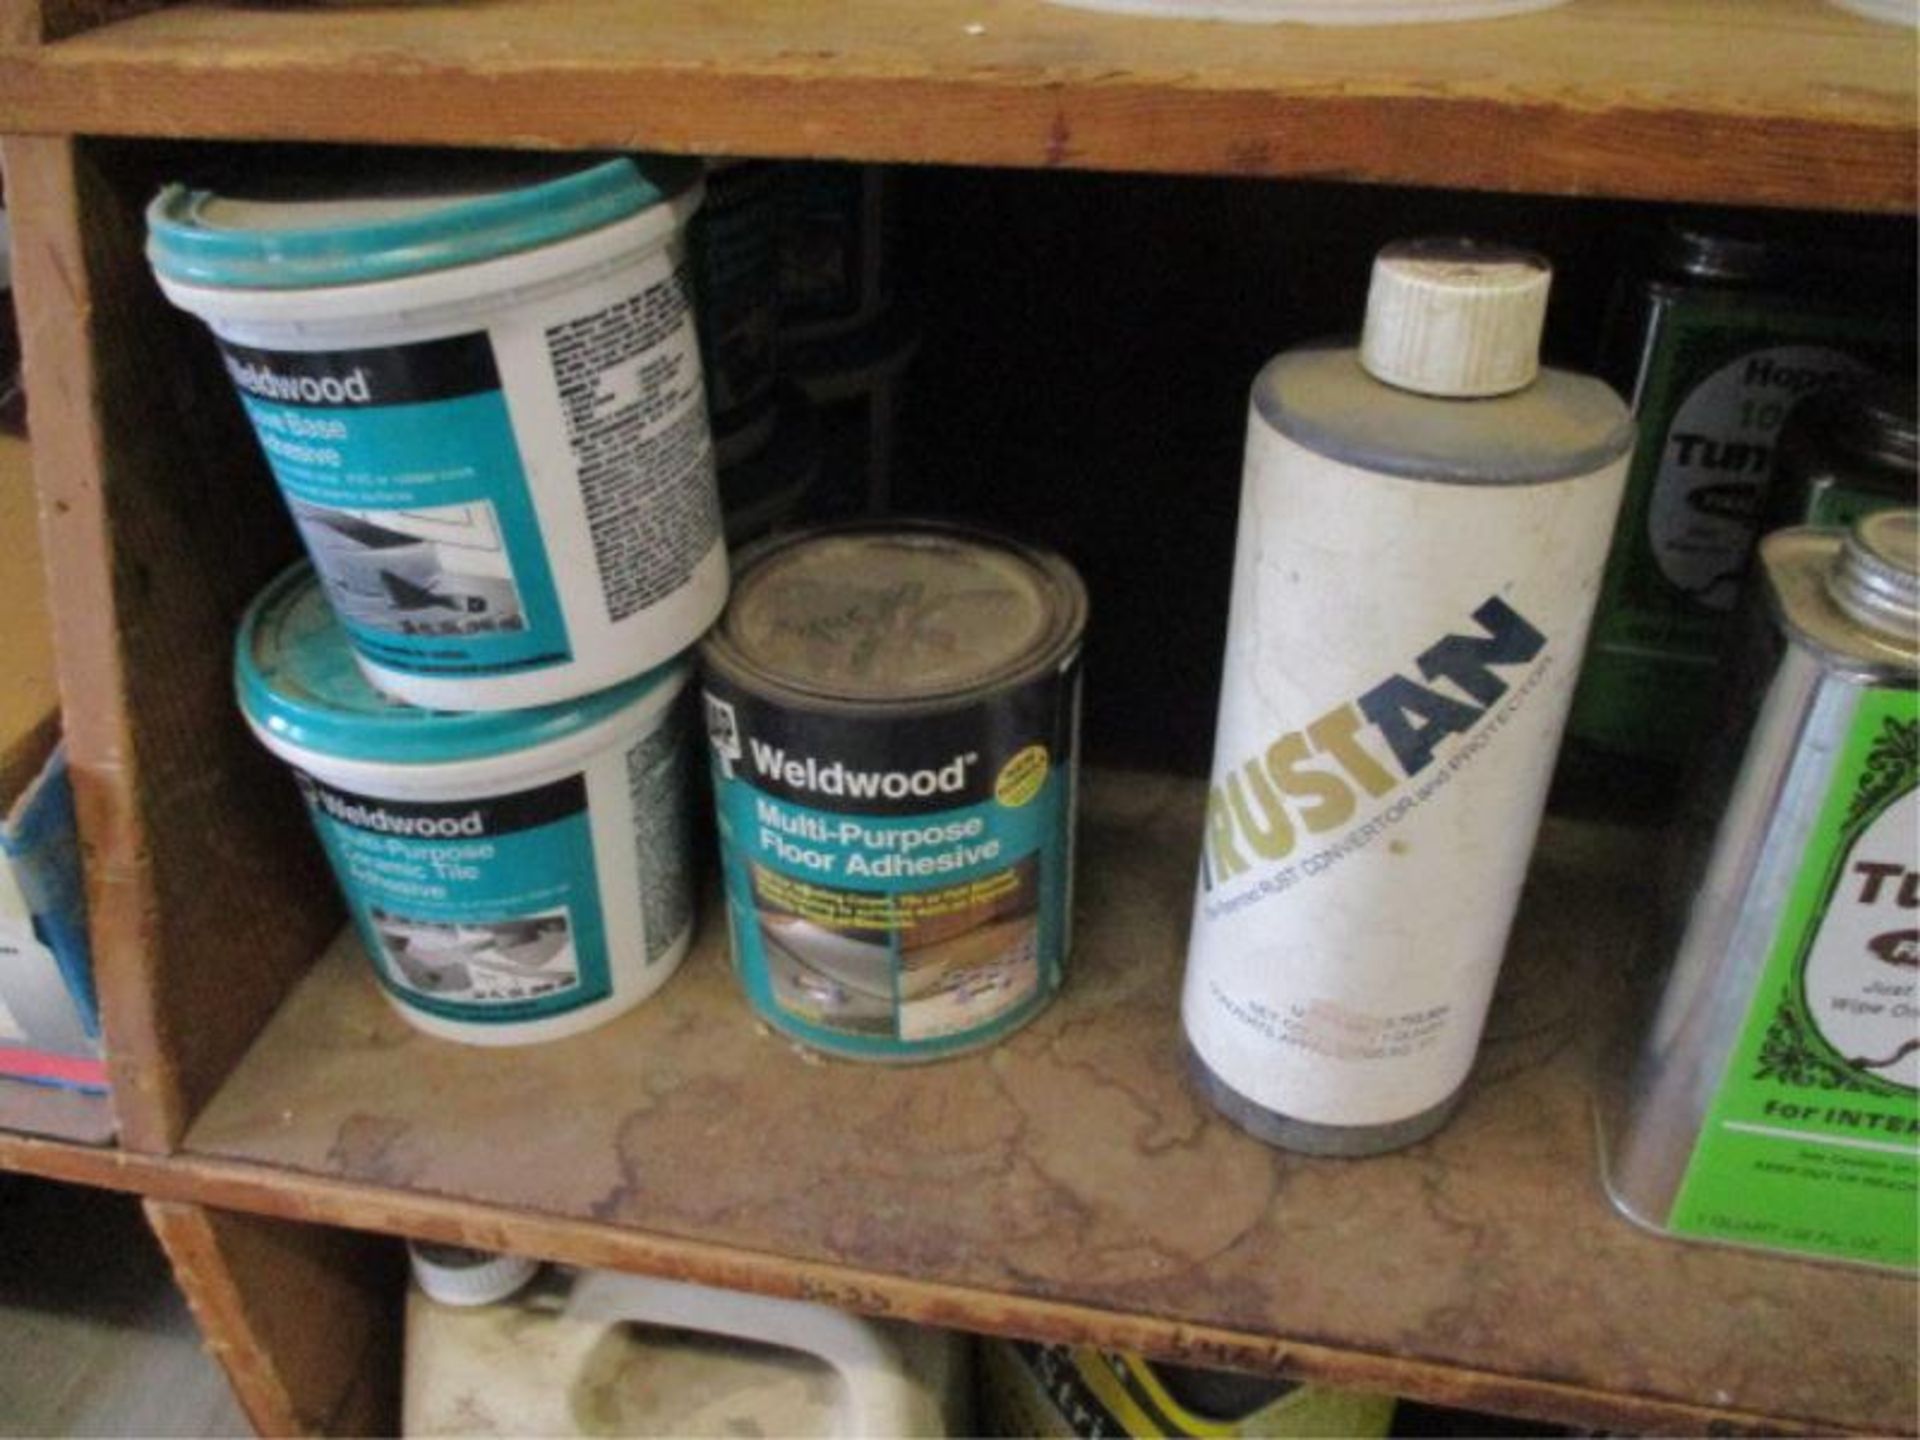 3 Shelves w/ Joint Compound, Water Putty, Tung Oil, Floor Adhesive, Deck Cleaner, Zip-Strip, B-I-N - Image 5 of 10